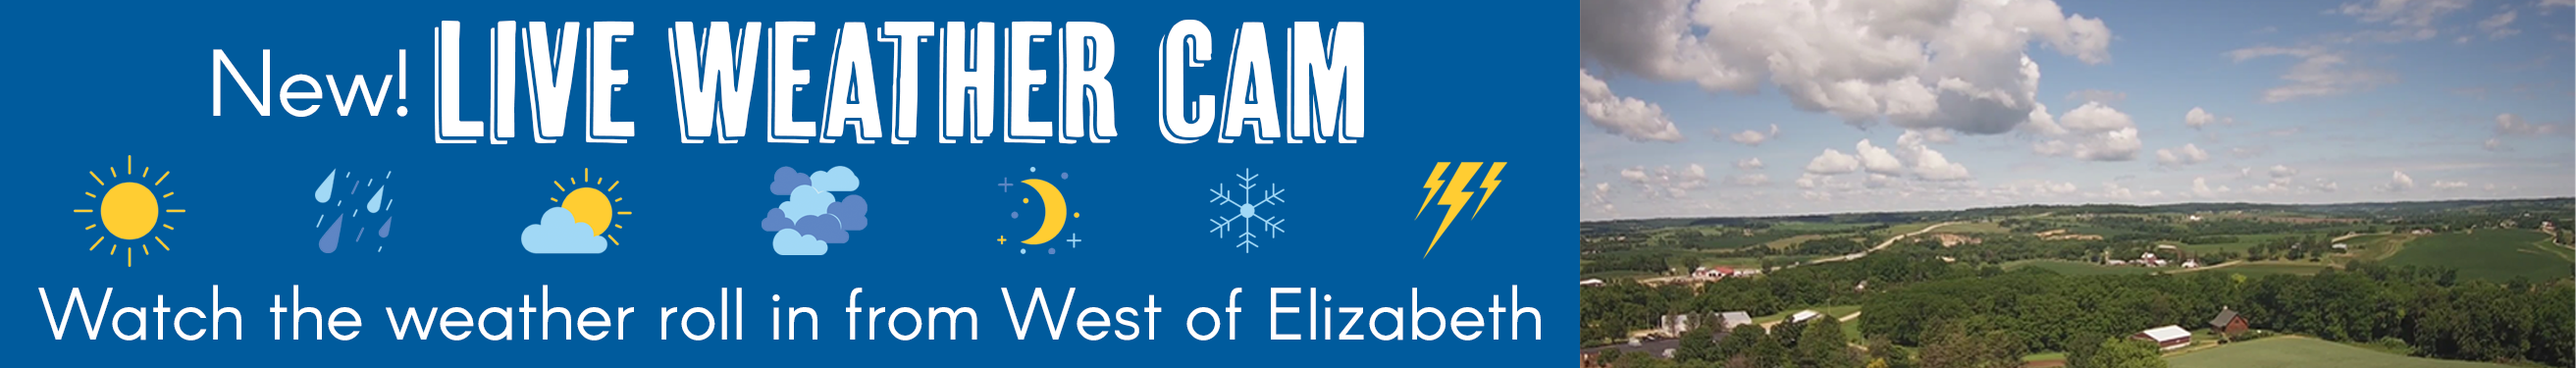 Live weather Cam for Elizabeth, IL